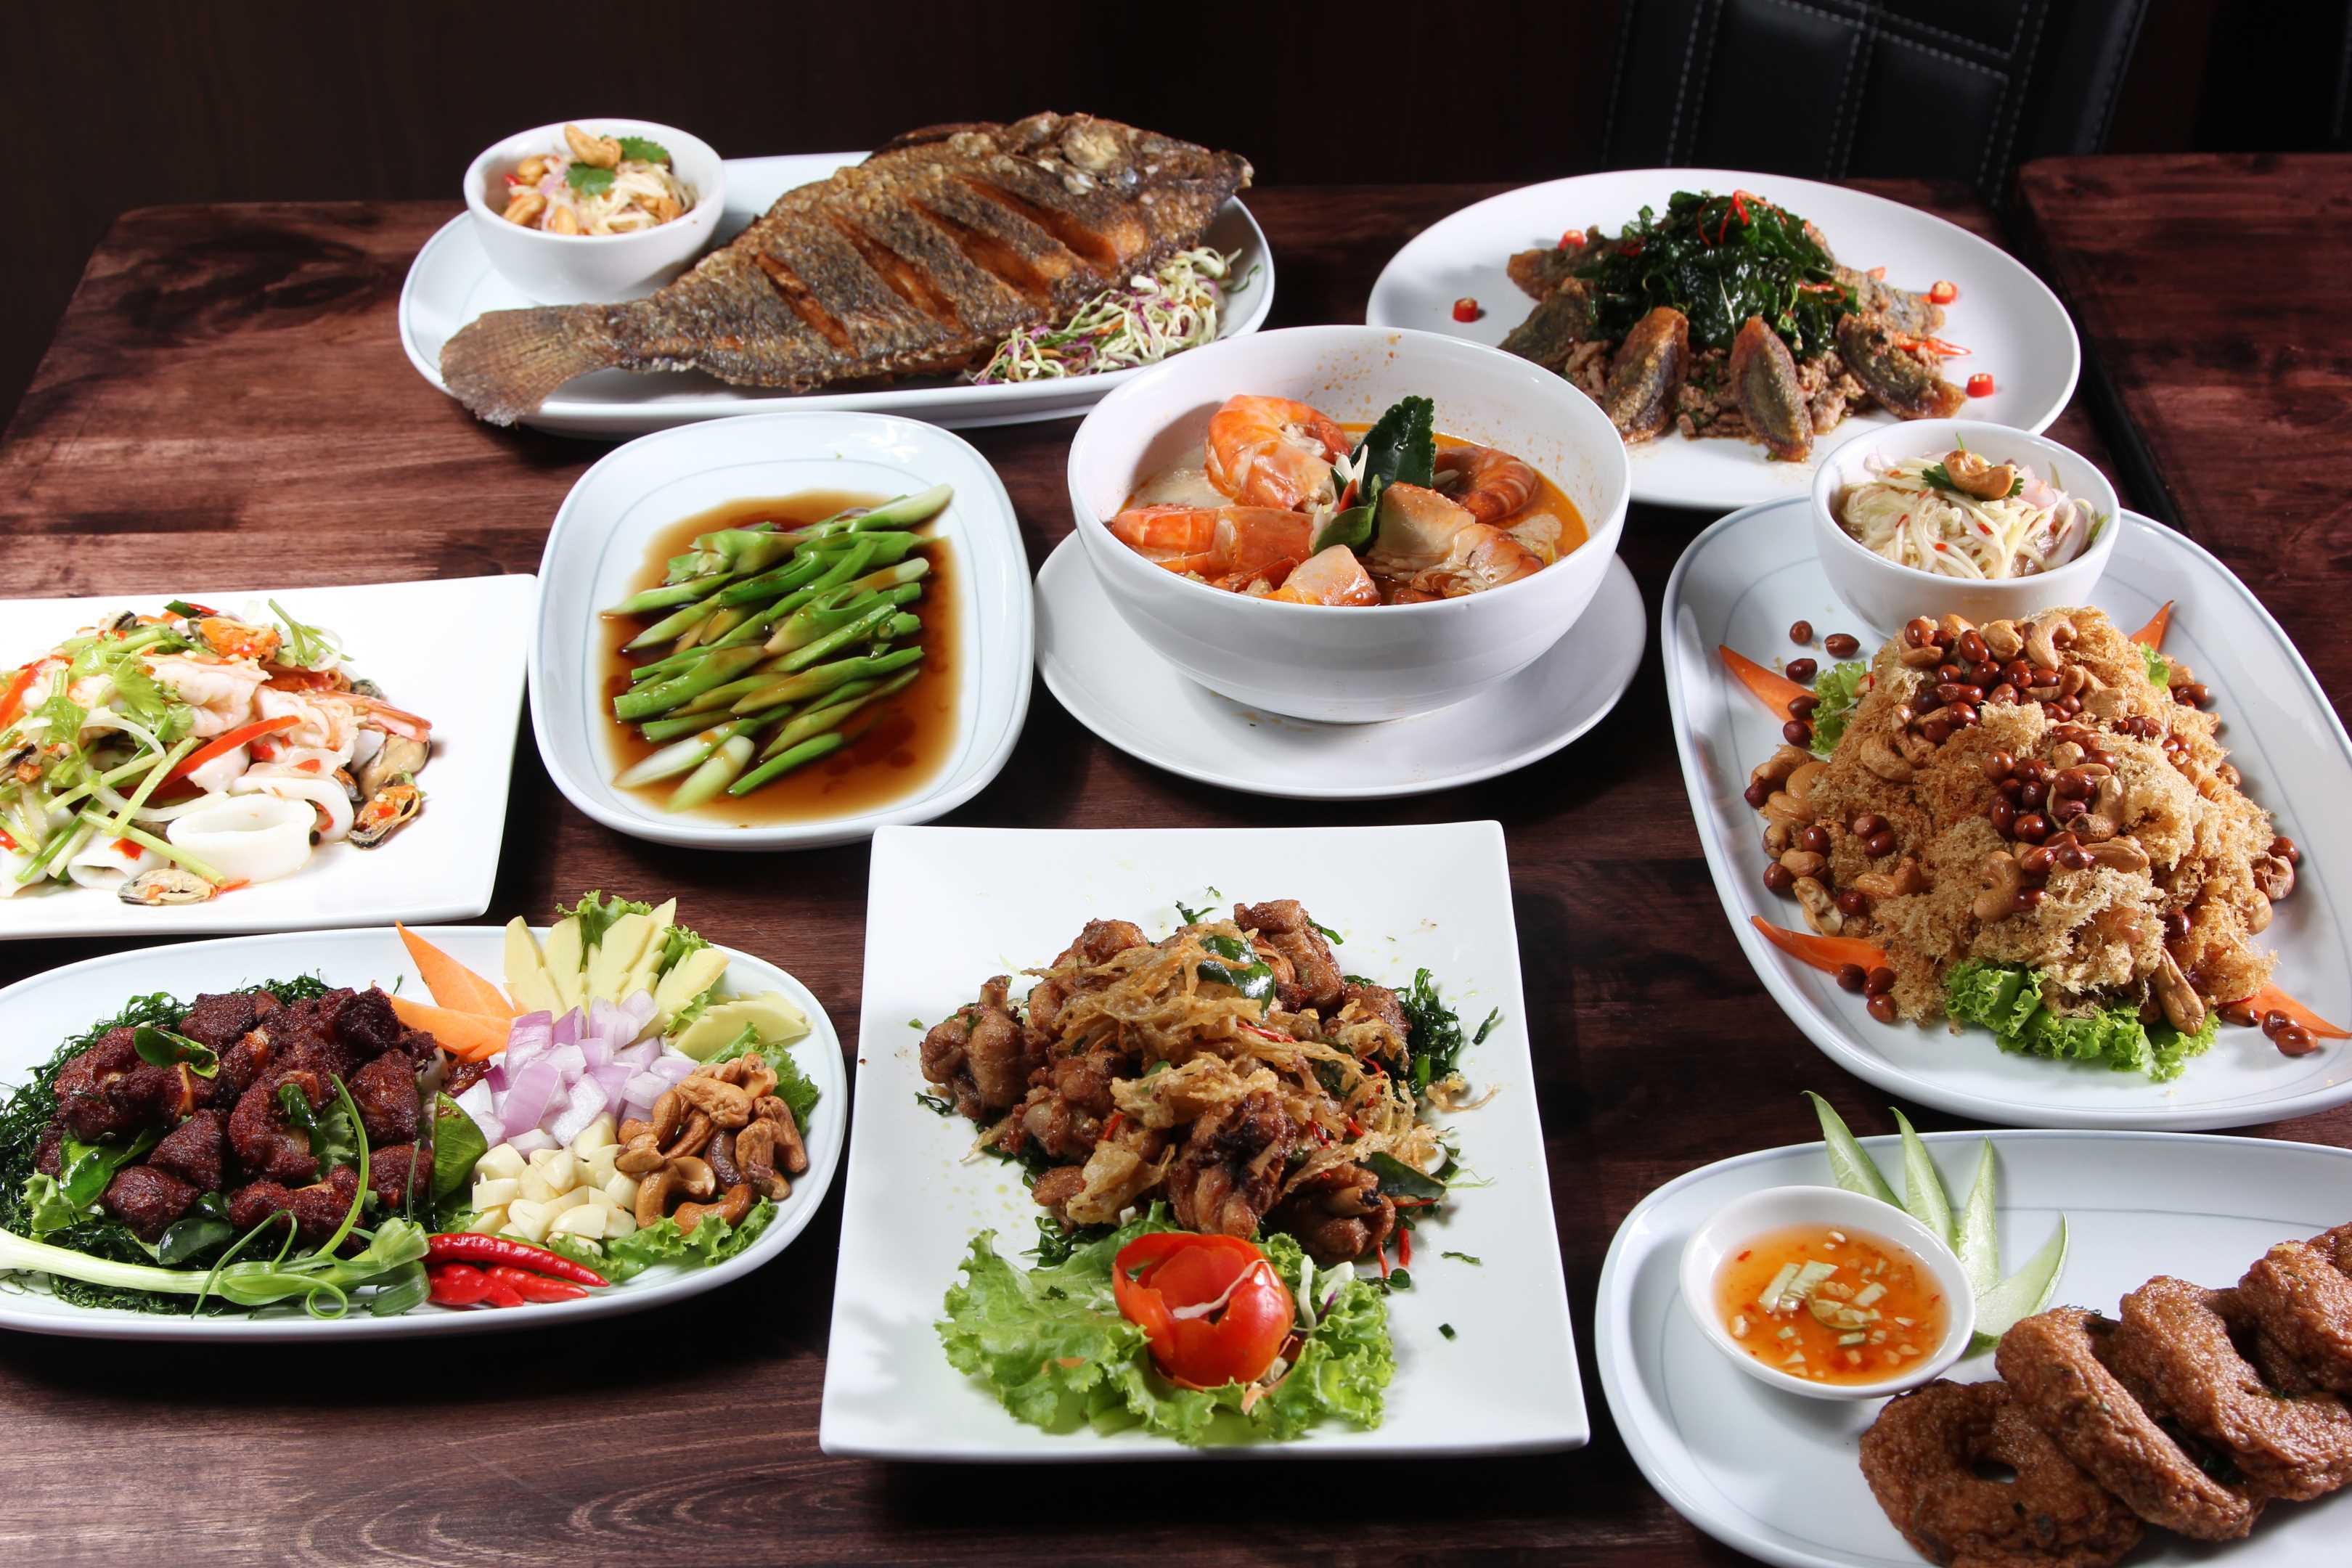 Food popularized in asian cuisine